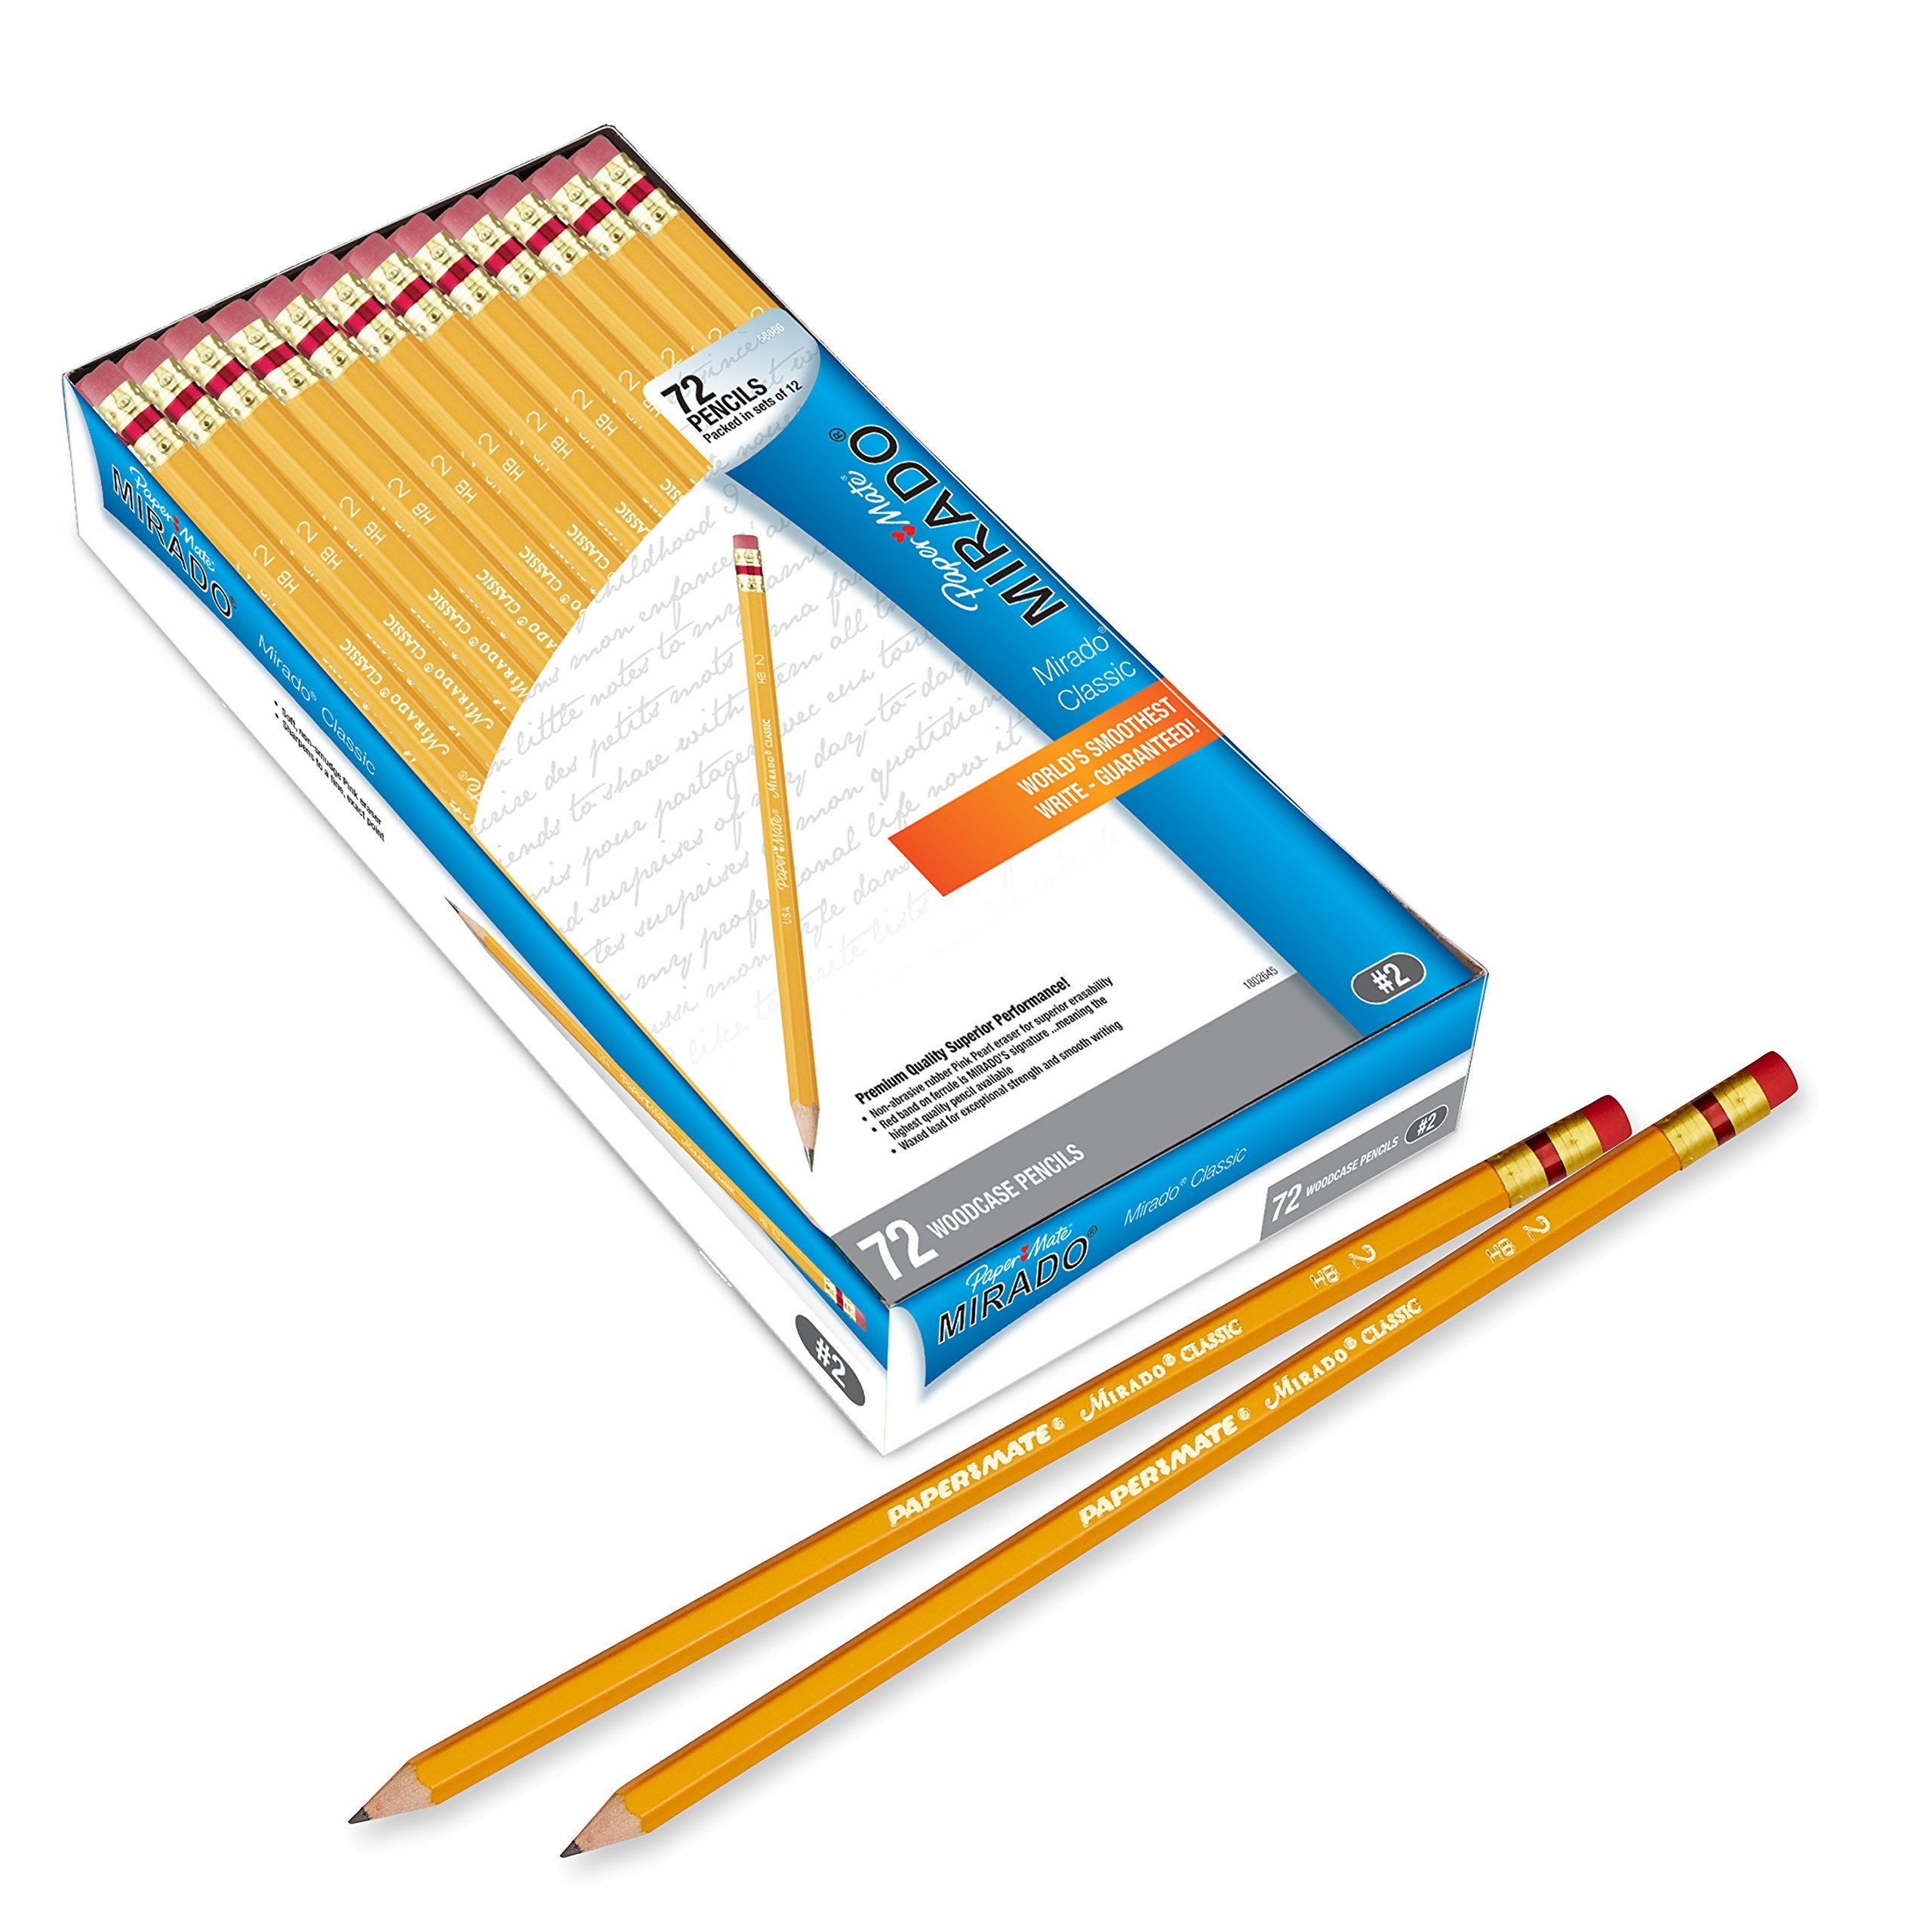 Book Cover Paper Mate Mirado Pencil, Classic Pencil № 2, 6-Carded, HB (5860) #2 Lead 72 Count (Pack of 1)